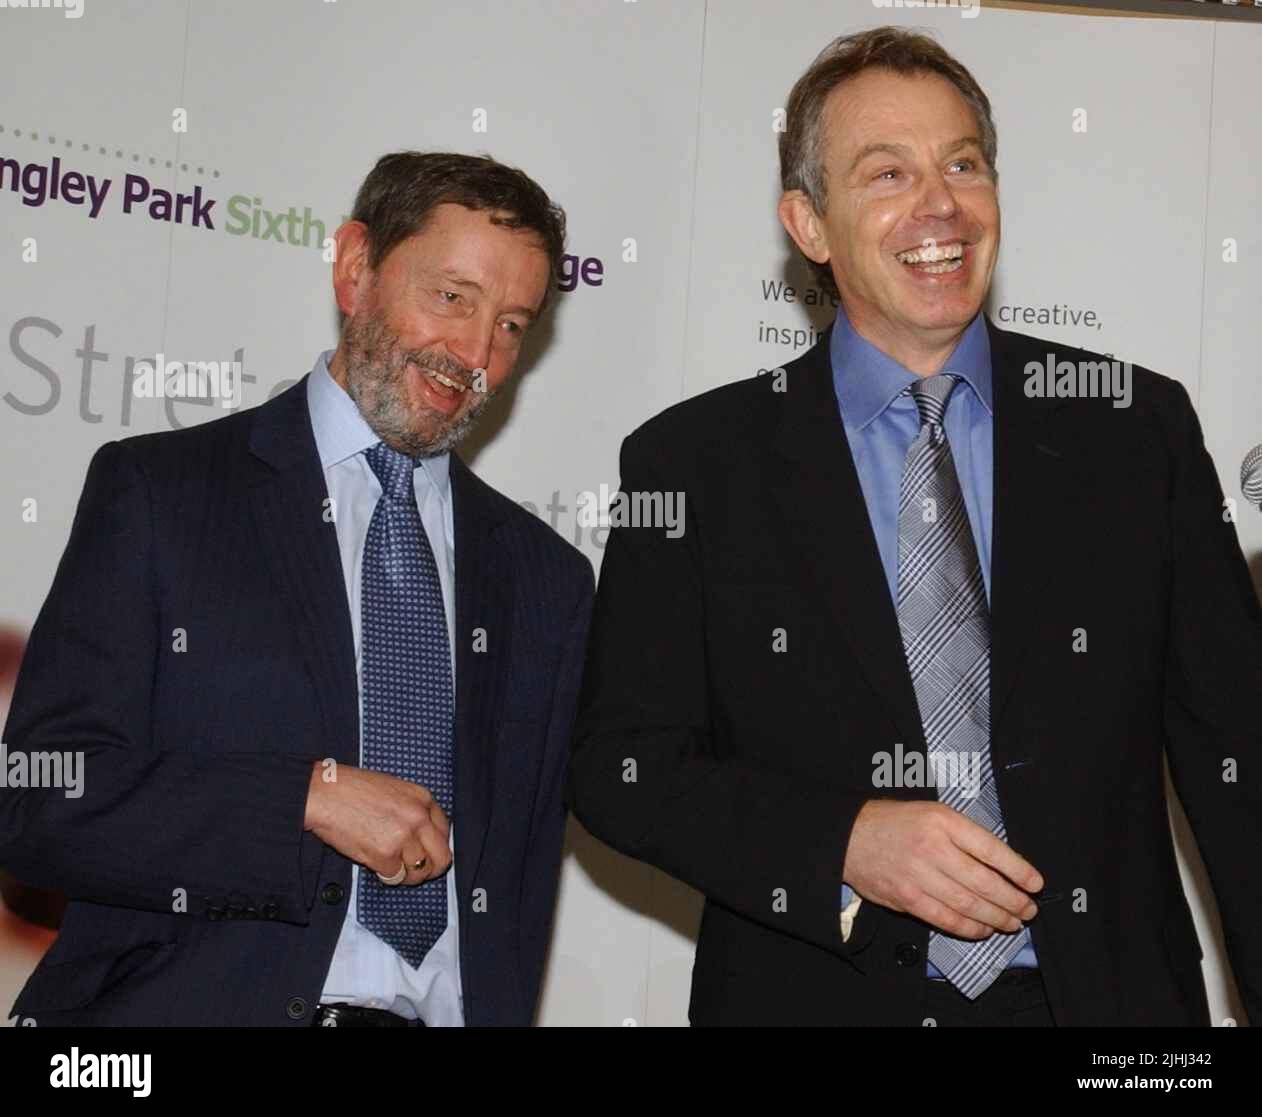 File photo dated 09/12/04 of the then prime minister Tony Blair (right) and David Blunkett at Longley Park Sixth Form School, Sheffield. Blair was warned about the Labour government's commitment to scrapping the infamous law banning the 'promotion' of homosexuality in schools in the run-up to the 2001 general election, records show. Blunkett, then the education secretary, twice wrote to the prime minister to voice his concerns regarding the furore over Section 28. Issue date: Tuesday July 19, 2022. Stock Photo